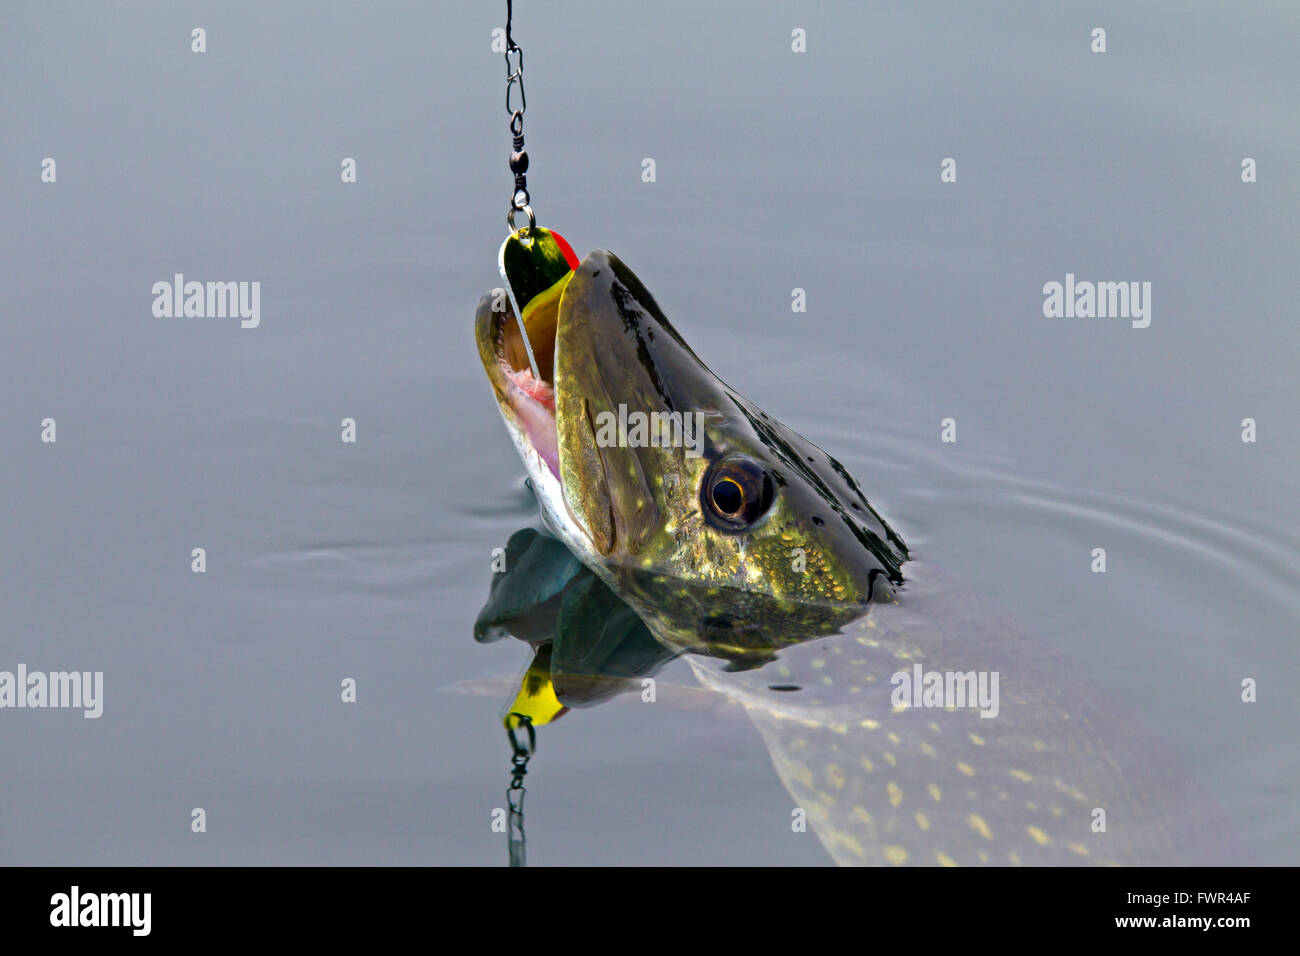 Hooked Northern pike (Esox lucius) in lake caught with lure on a fishing line Stock Photo